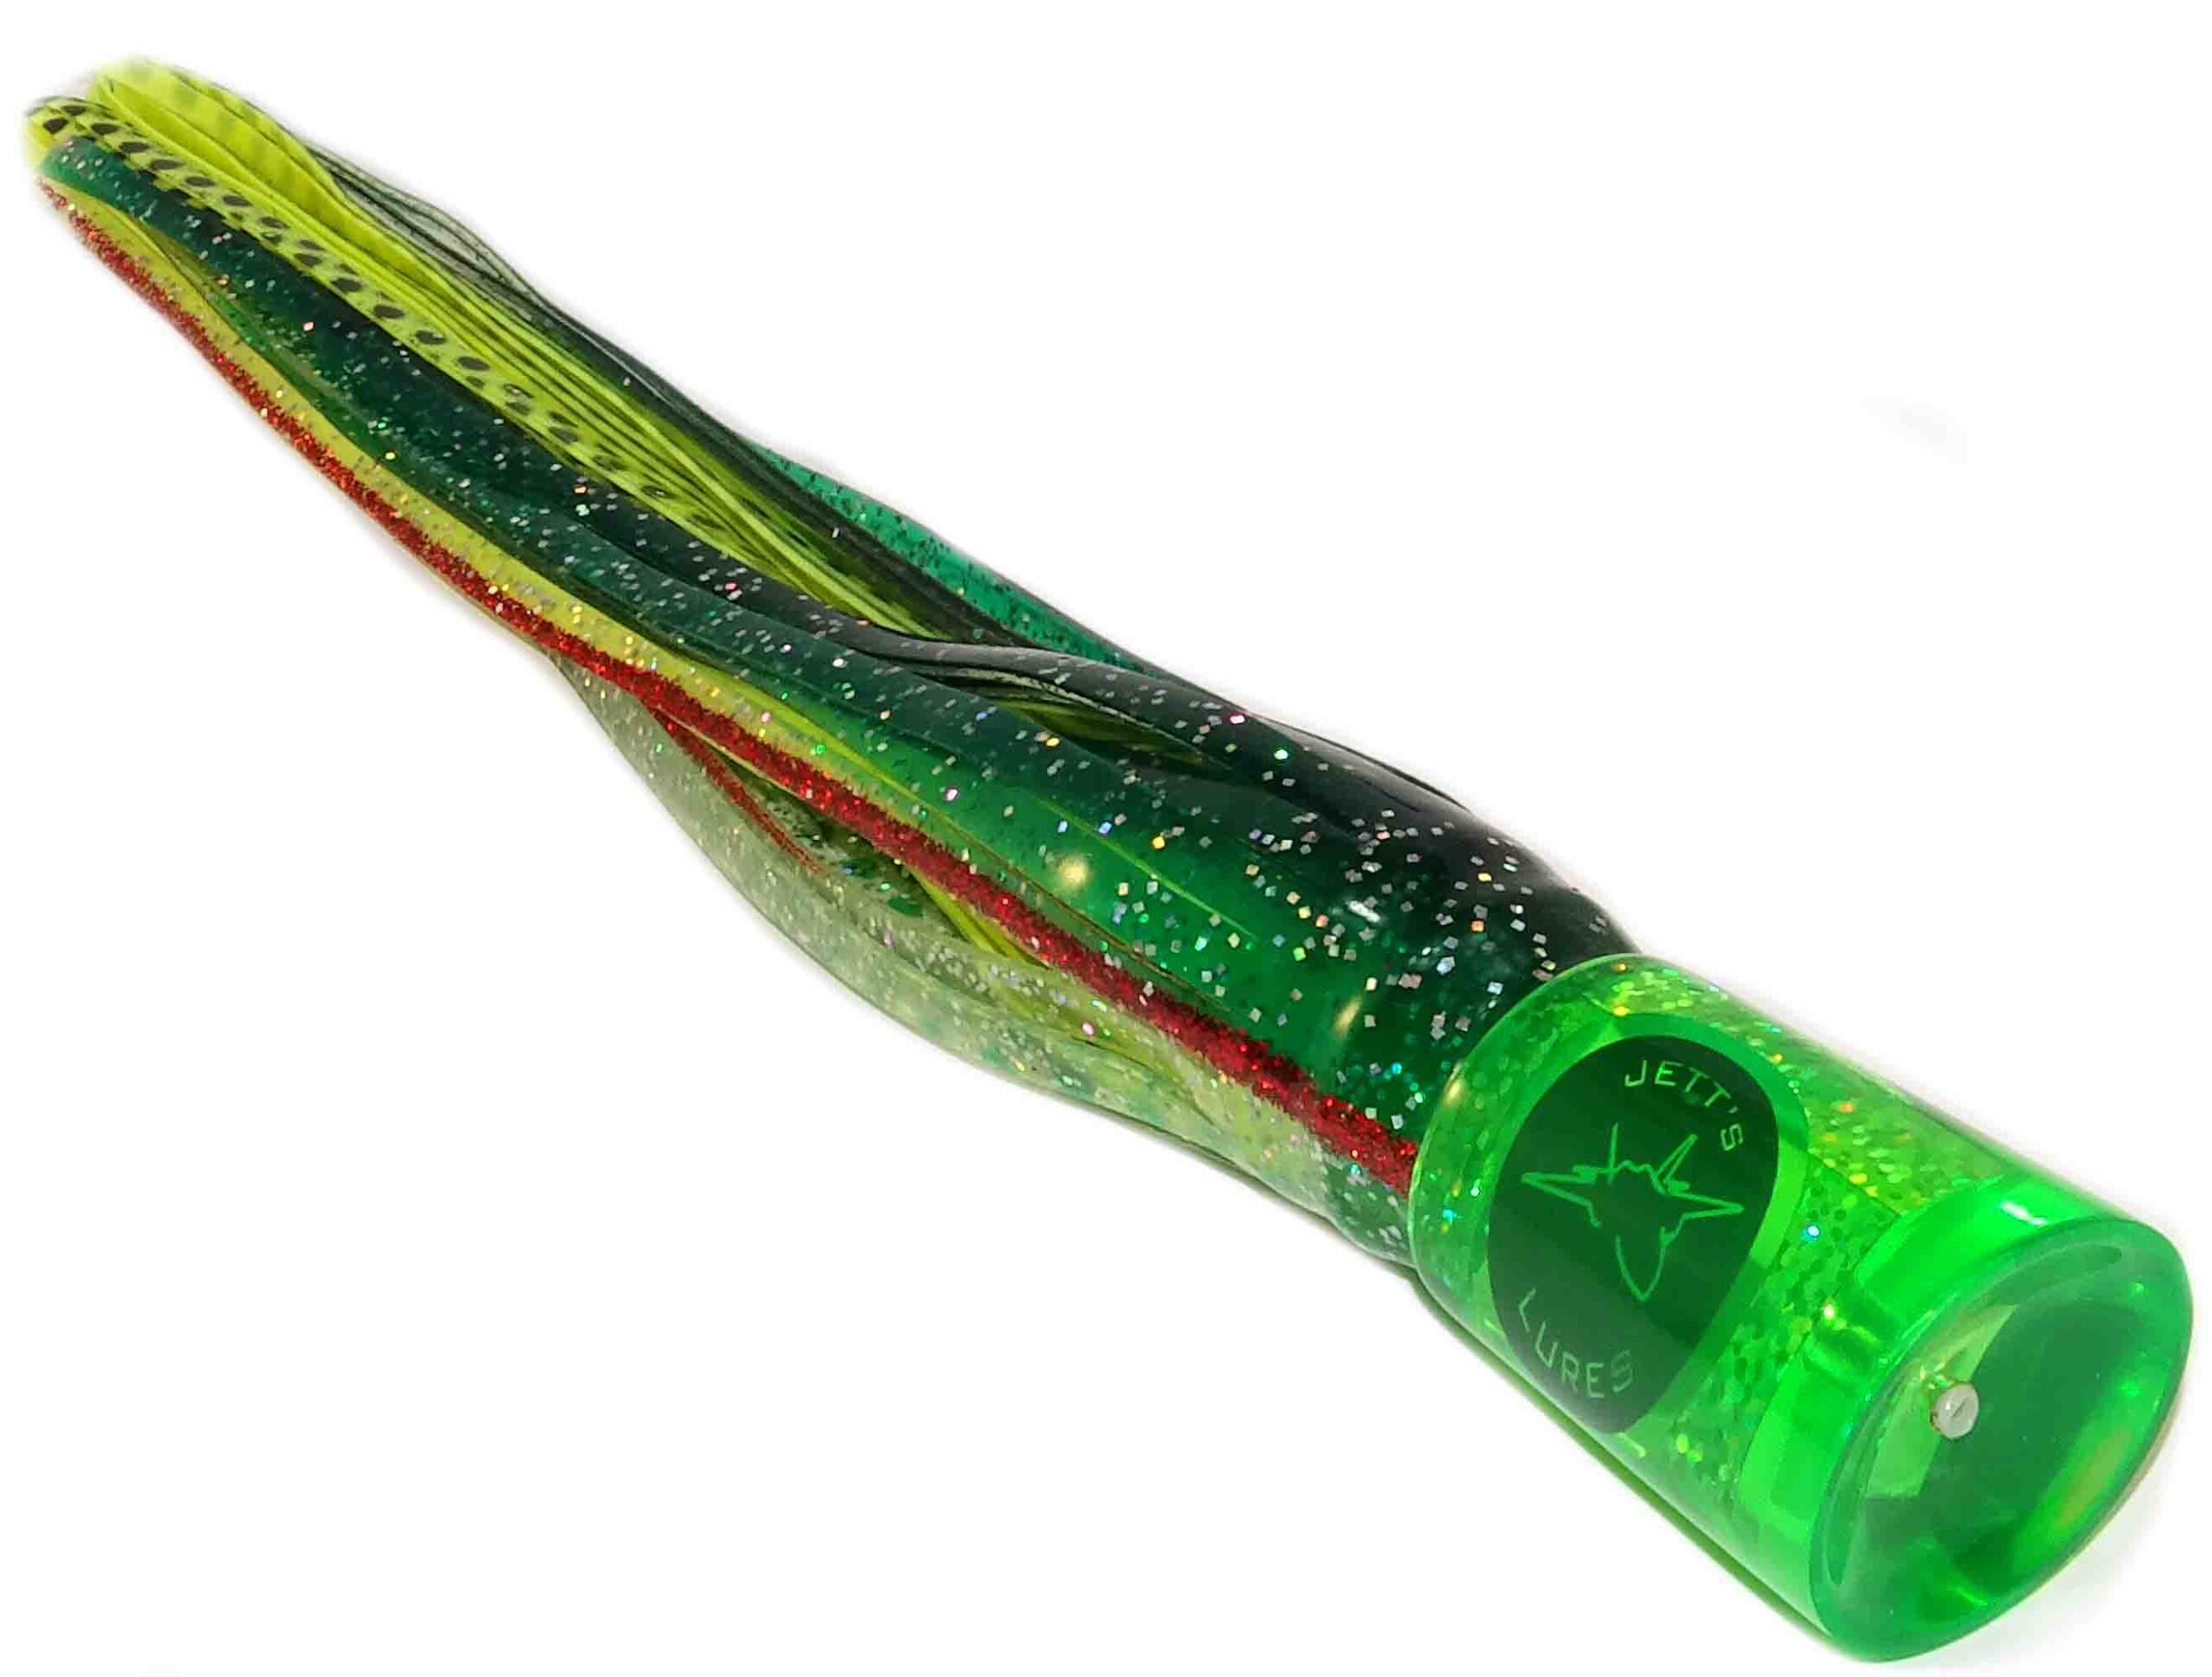 Jetts Lures - Insane Series - Ancient Mariner